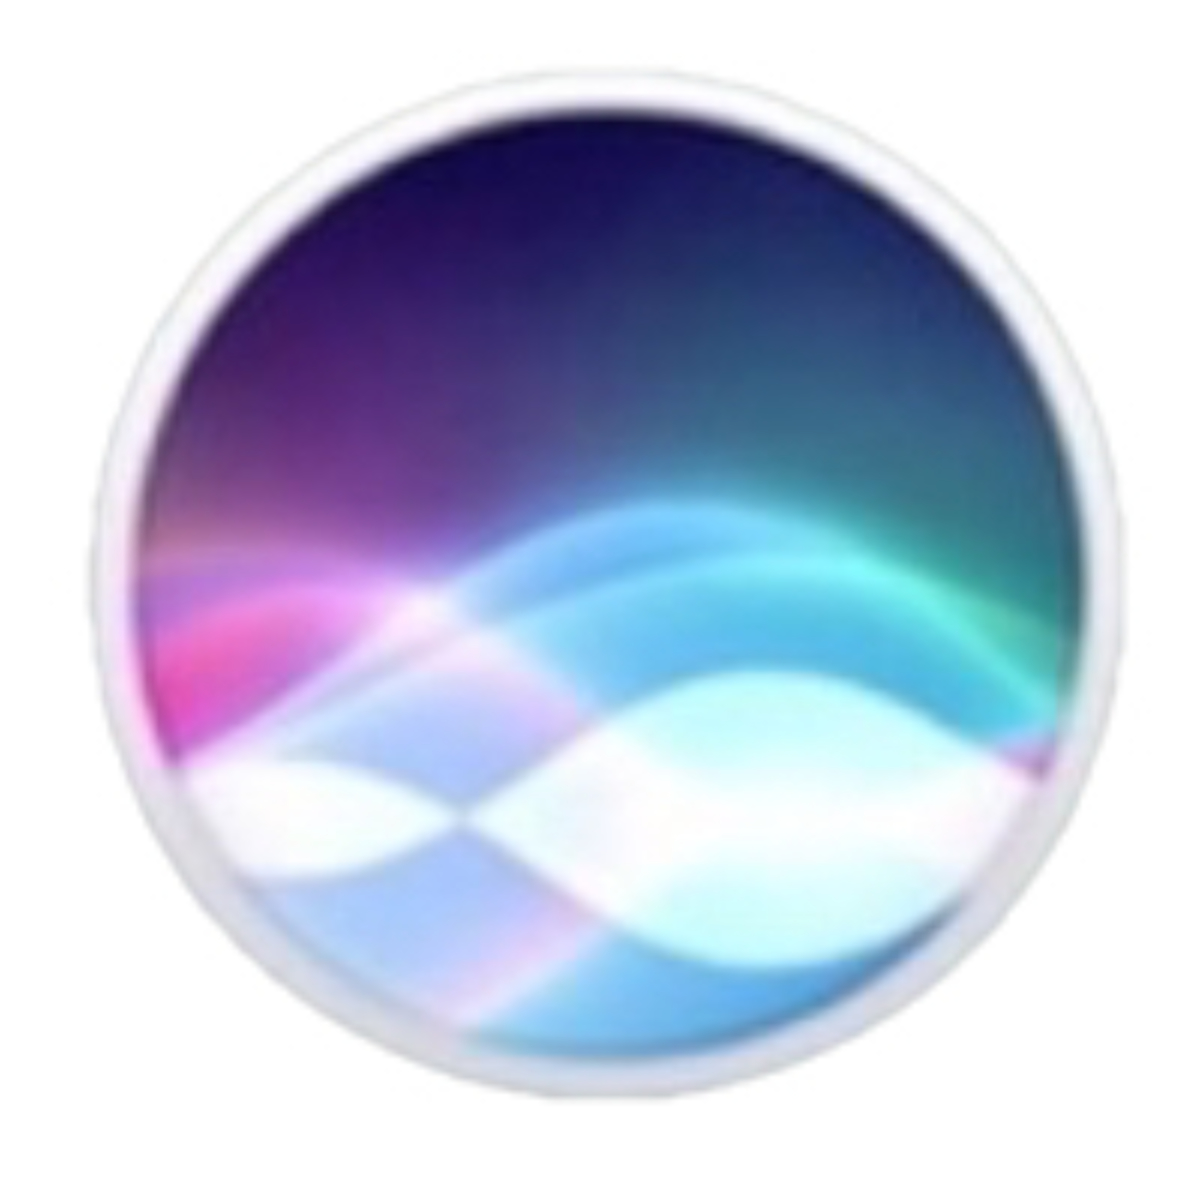 macos voice to text